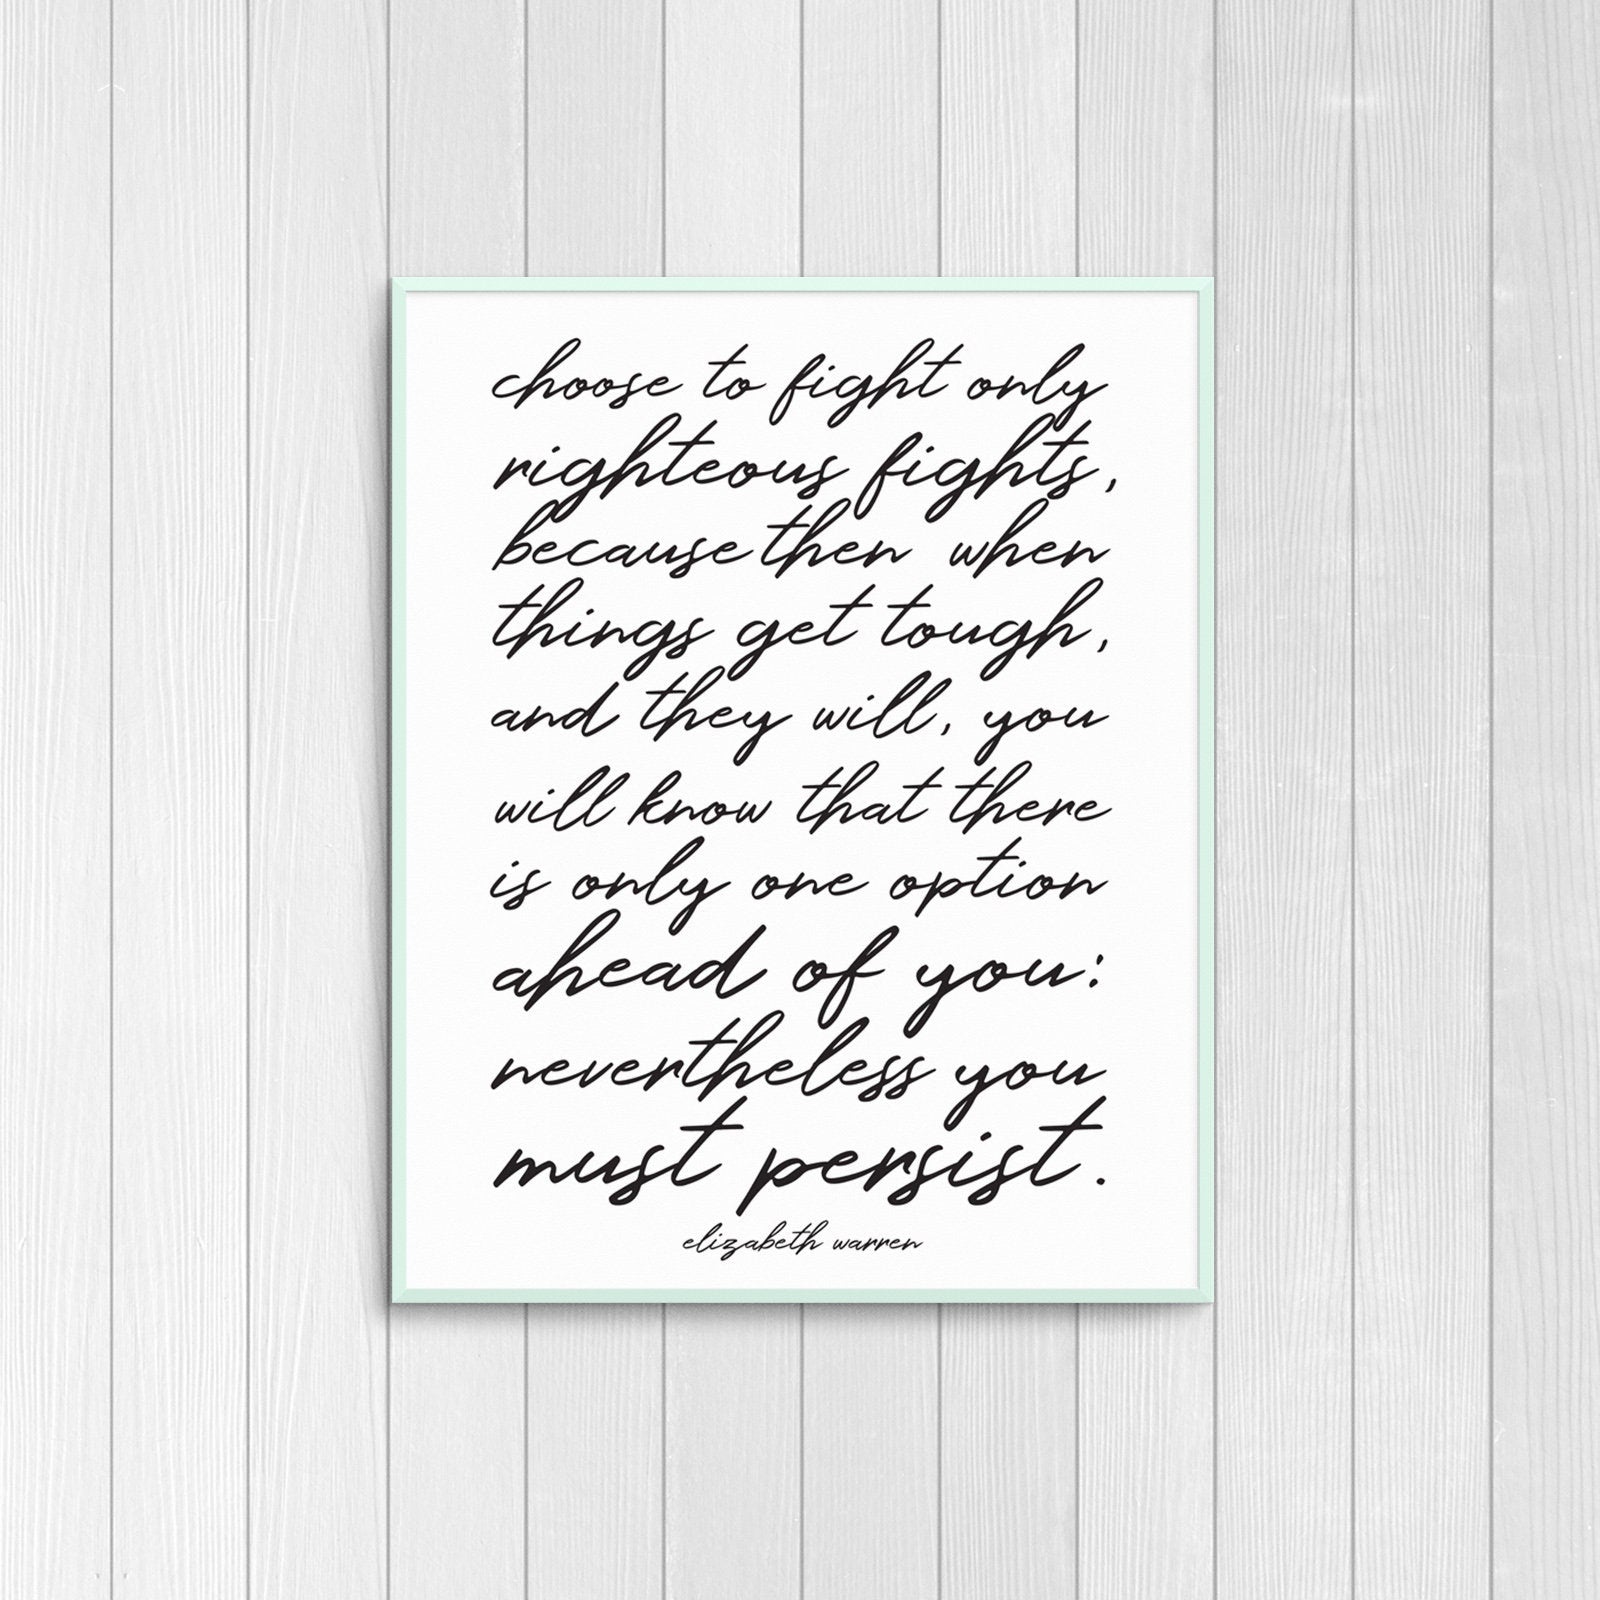 ART PRINT "Fight only righteous fights..." - Elizabeth Warren, Printable Quote, Home Decor, Custom Gift, Frameable